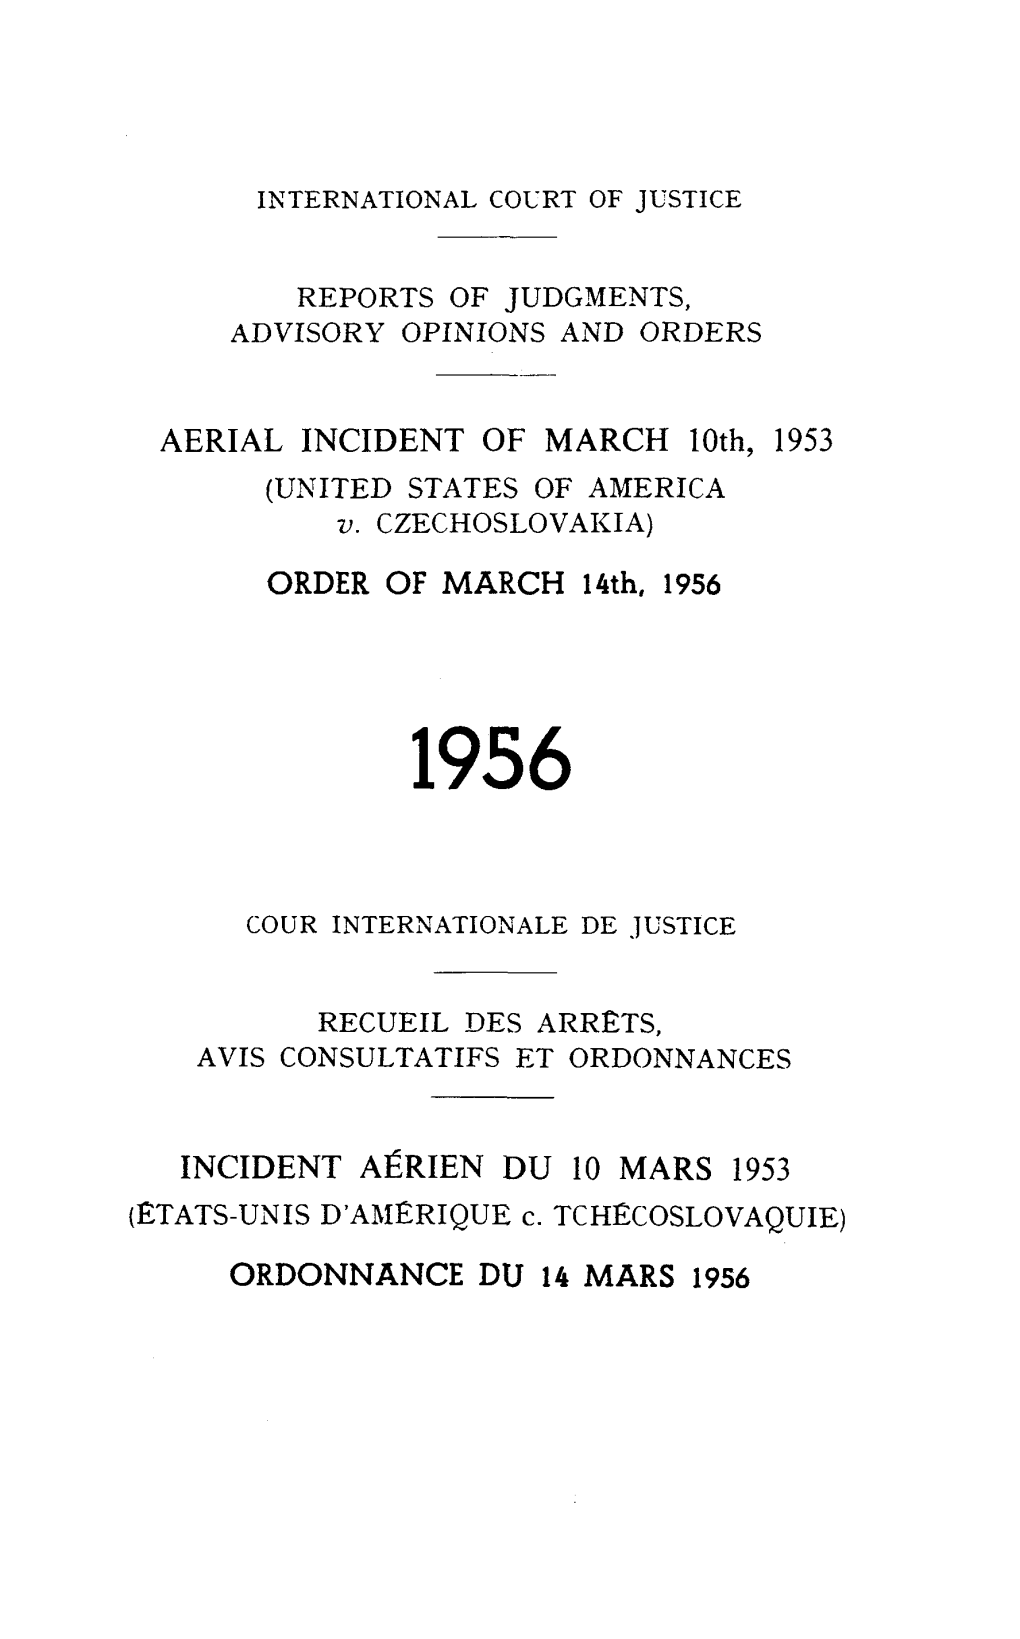 AERIAL INCIDENT of MARCH Loth, 1953 (UNITED STATES of AMERICA V